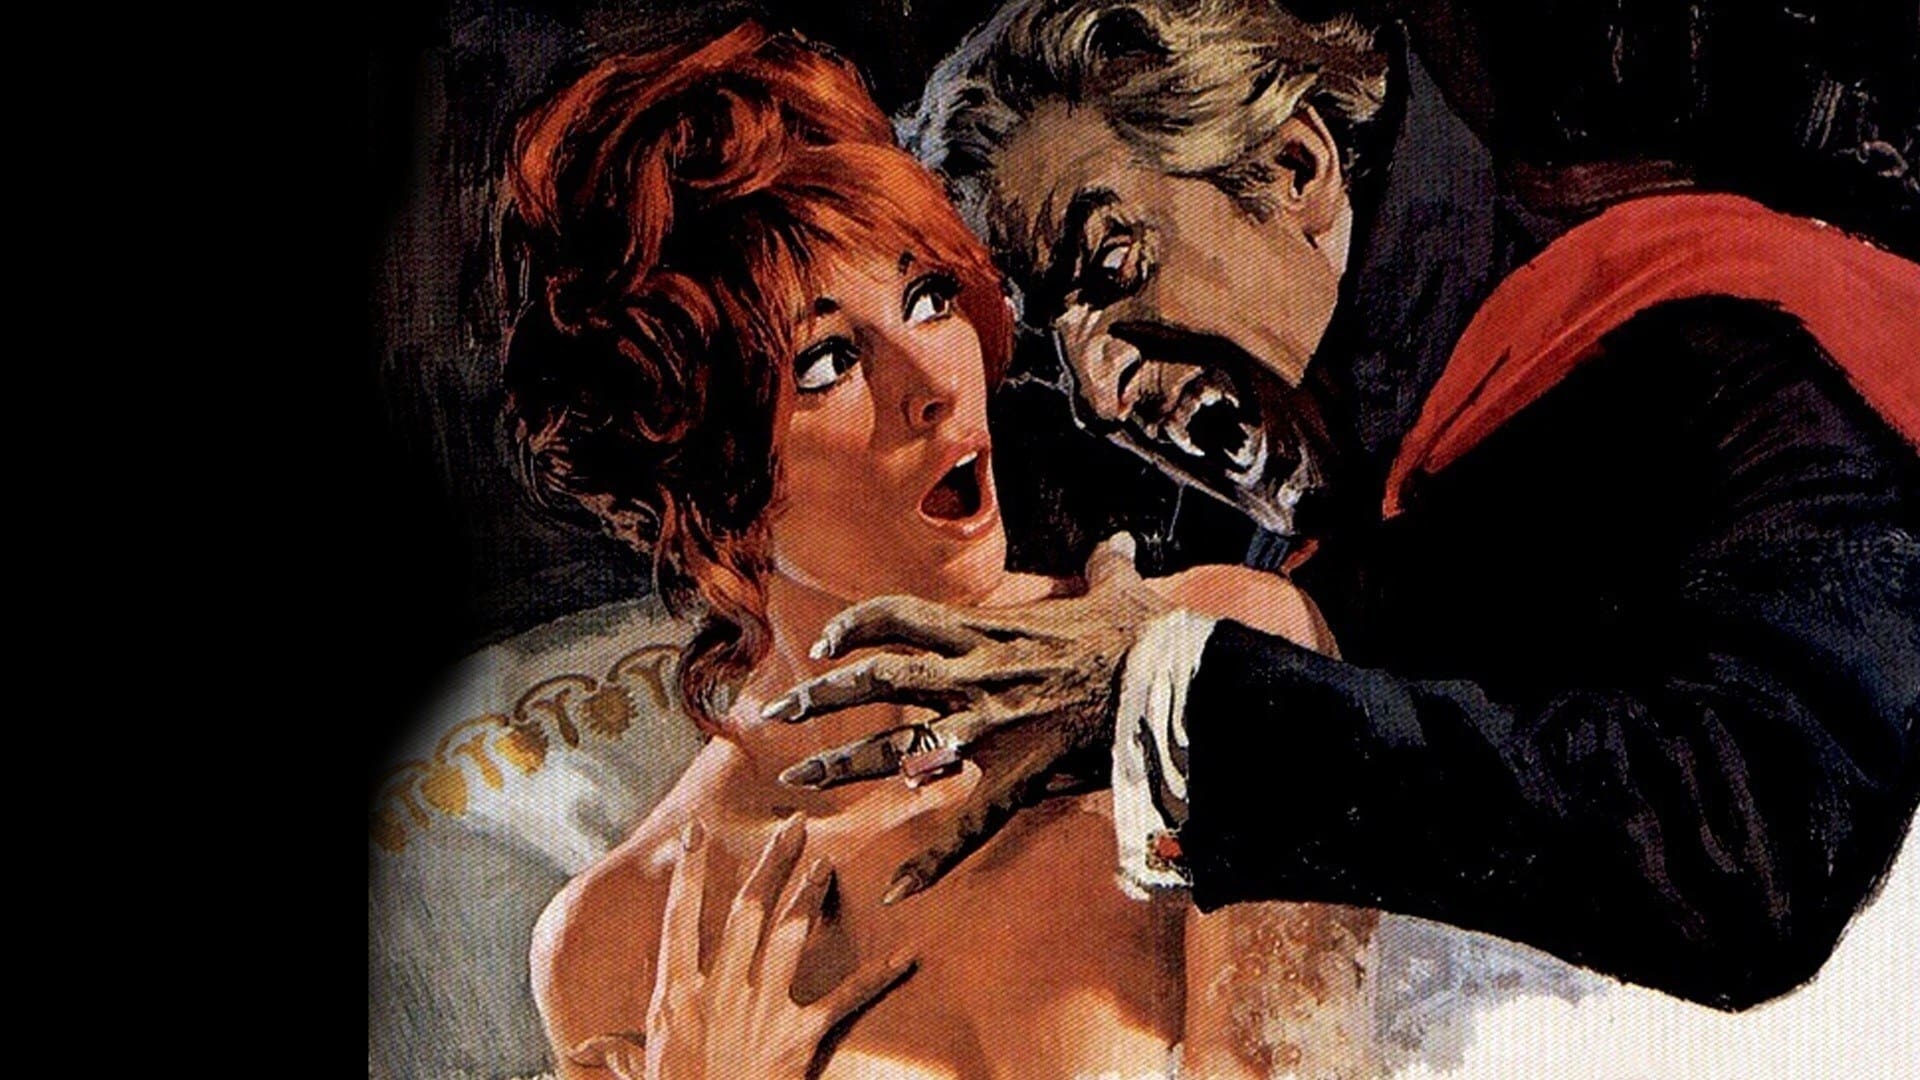 The Fearless Vampire Killers